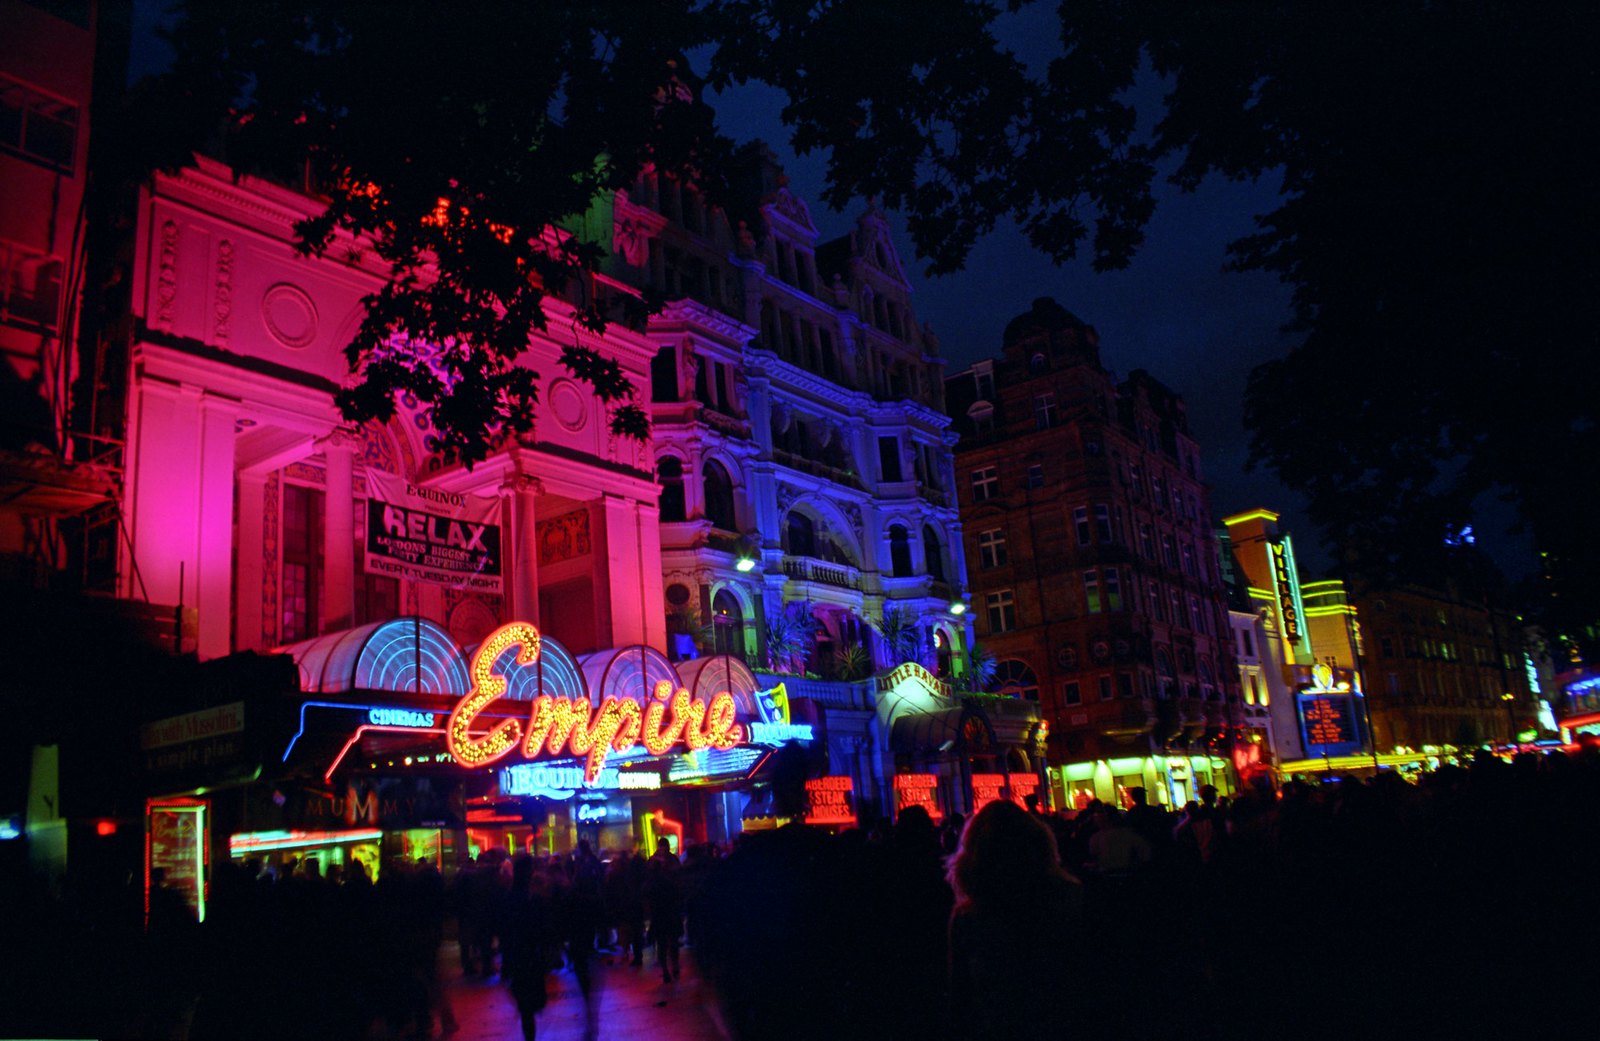 Leicester Square at Night